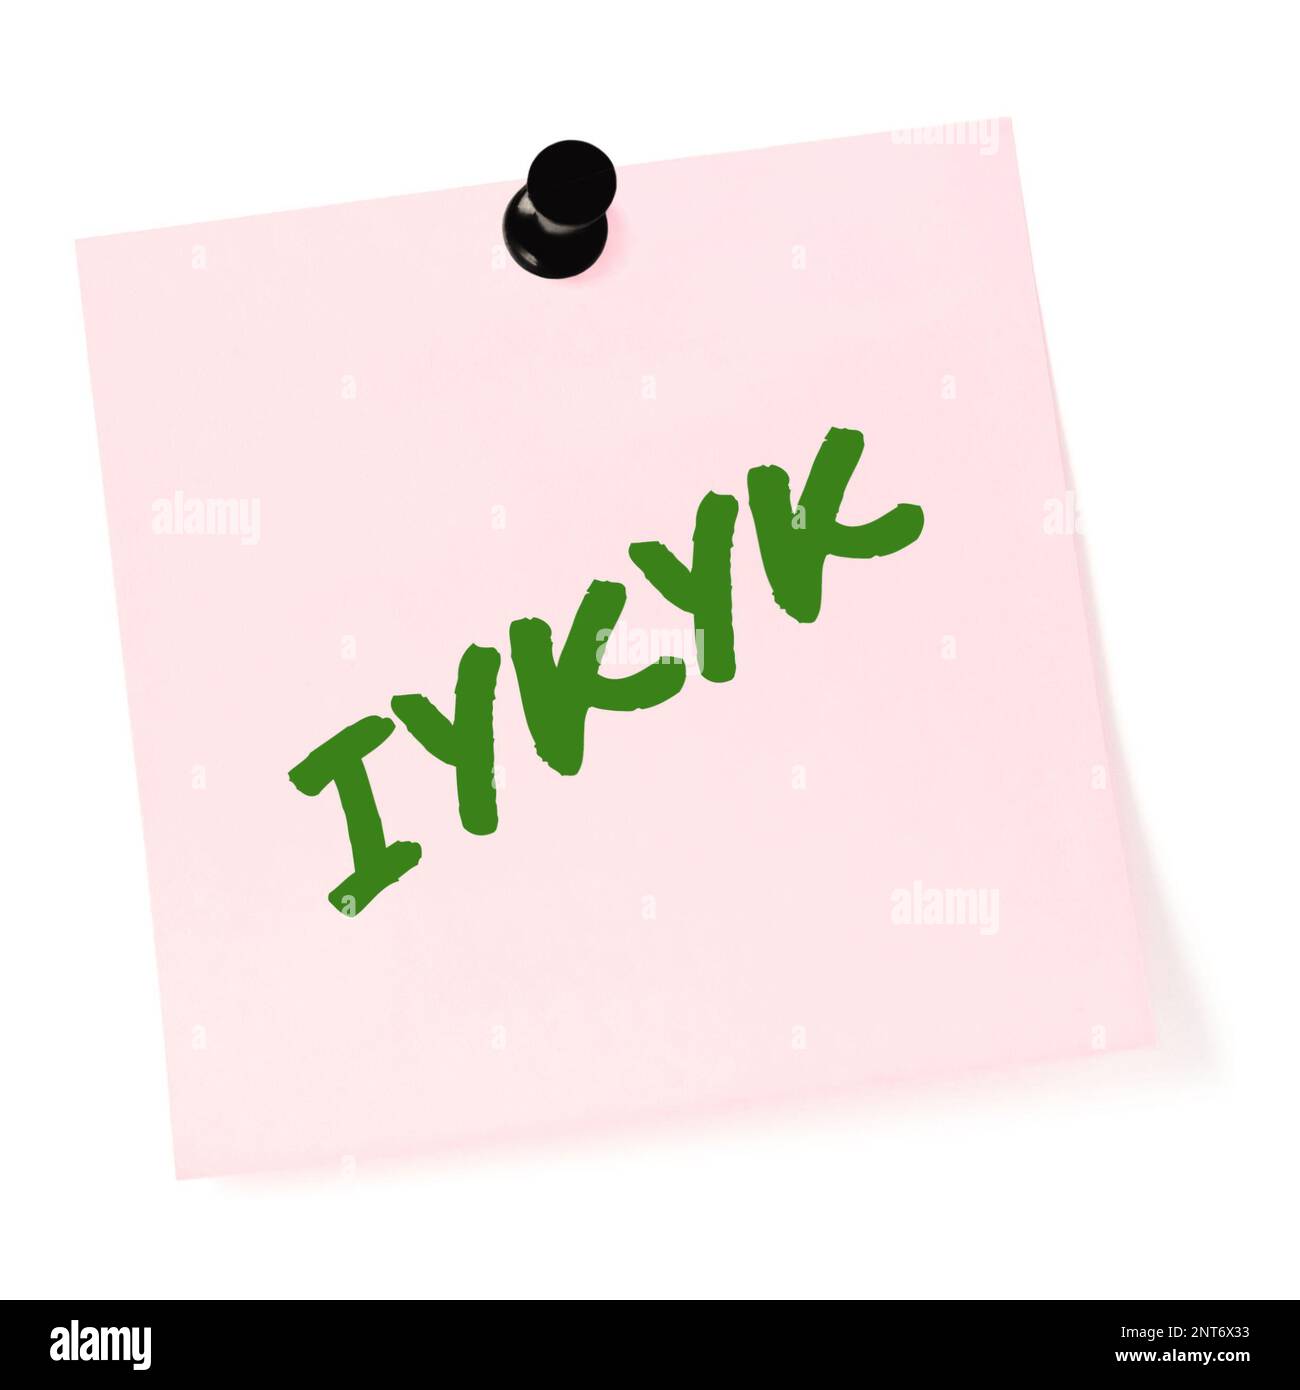 https://c8.alamy.com/comp/2NT6X33/if-you-know-you-know-acronym-iykyk-macro-closeup-green-marker-text-tiktok-jokes-concept-isolated-pink-adhesive-post-it-note-black-pushpin-2NT6X33.jpg